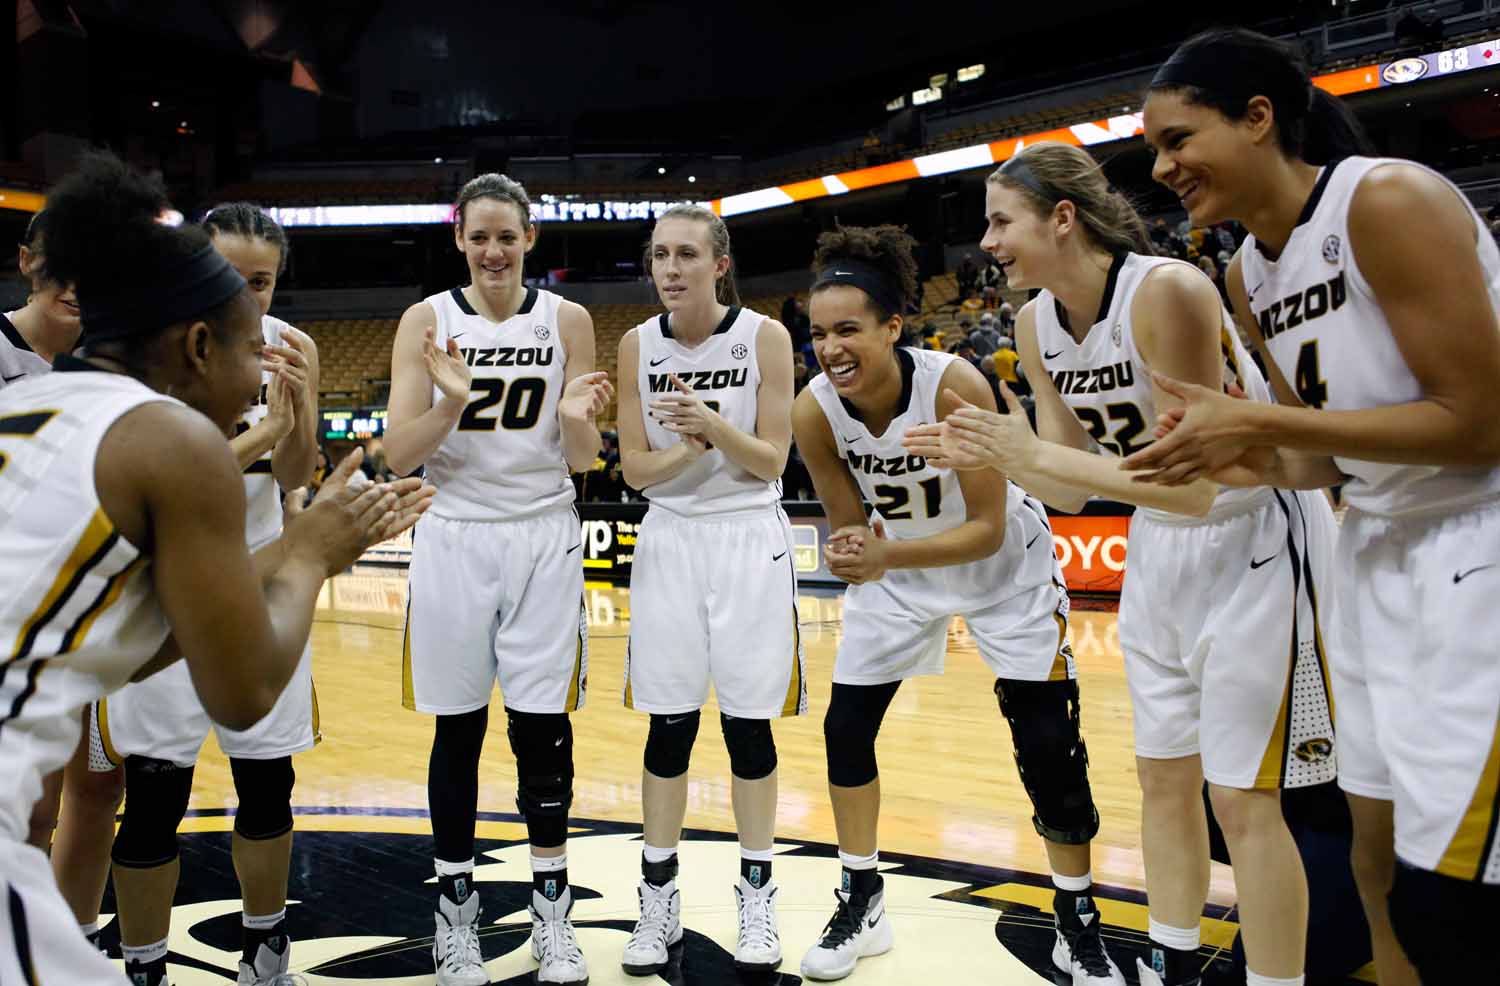 The Mizzou Tigers celebrate together mid-court following the conclusion of their 63-52 win over Alabama Thursday evening, Feb. 11, 2016.